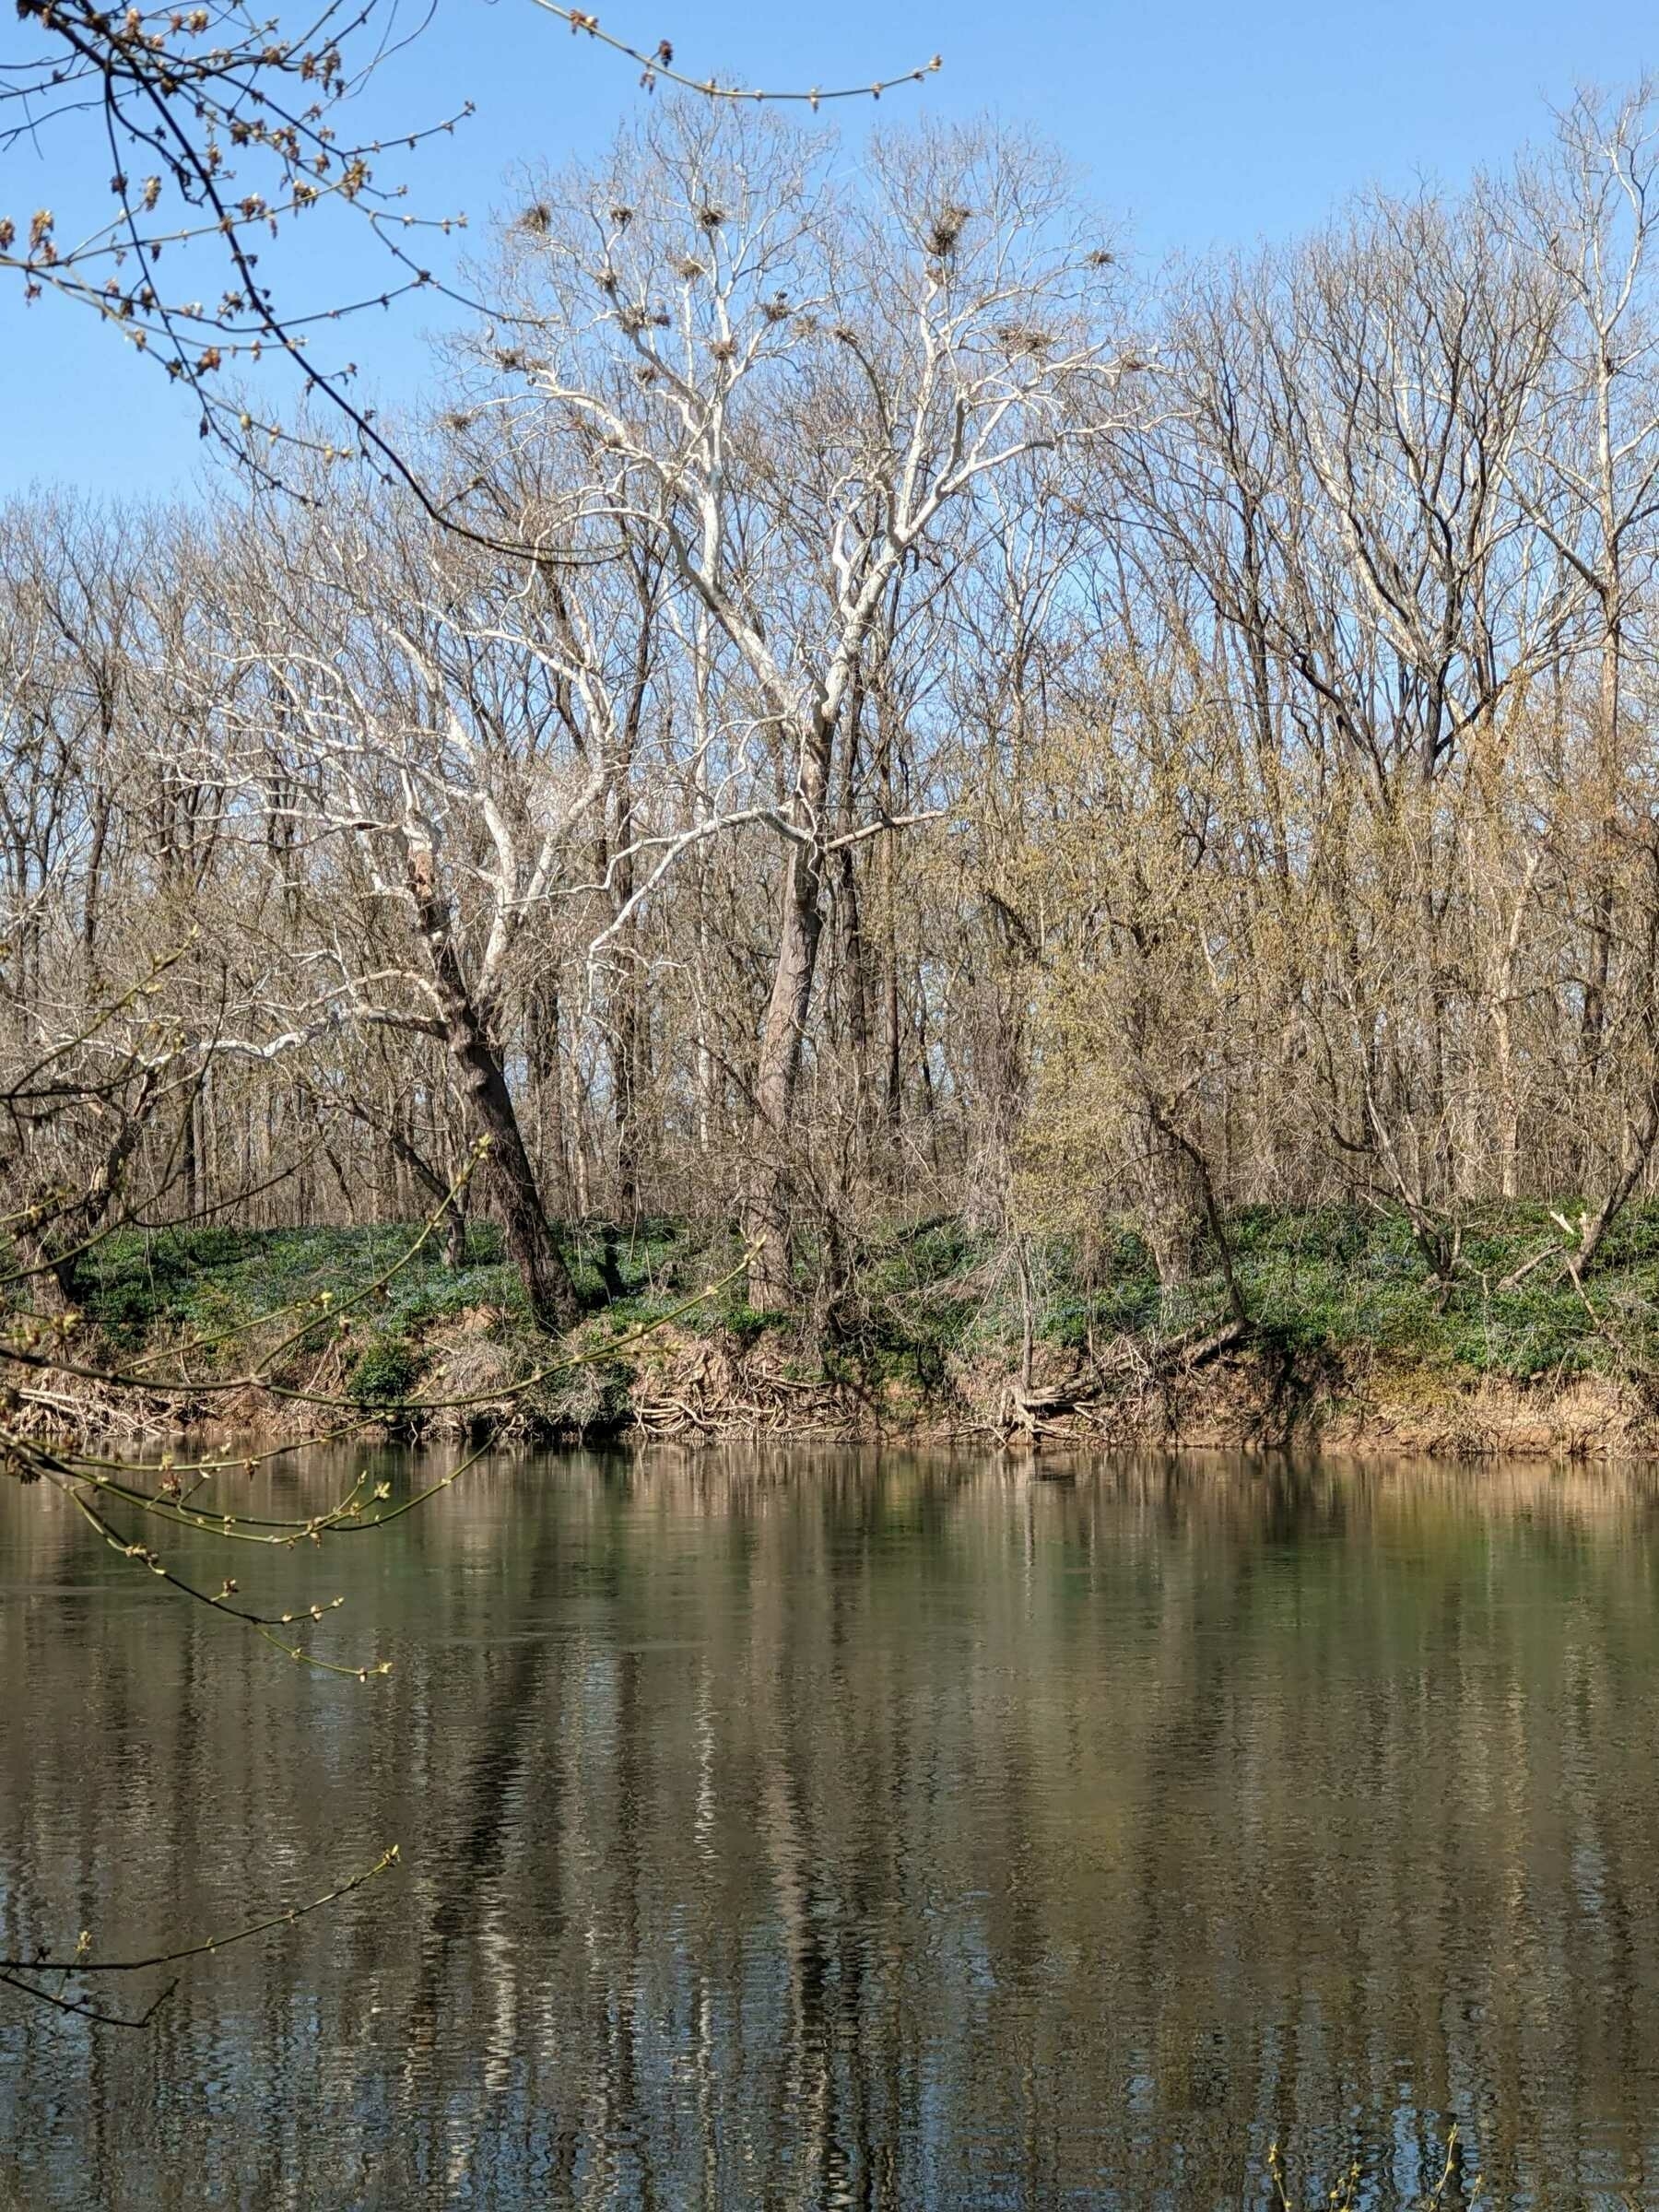 sycamore tree with several Great Blue heron nests, reflected in the water